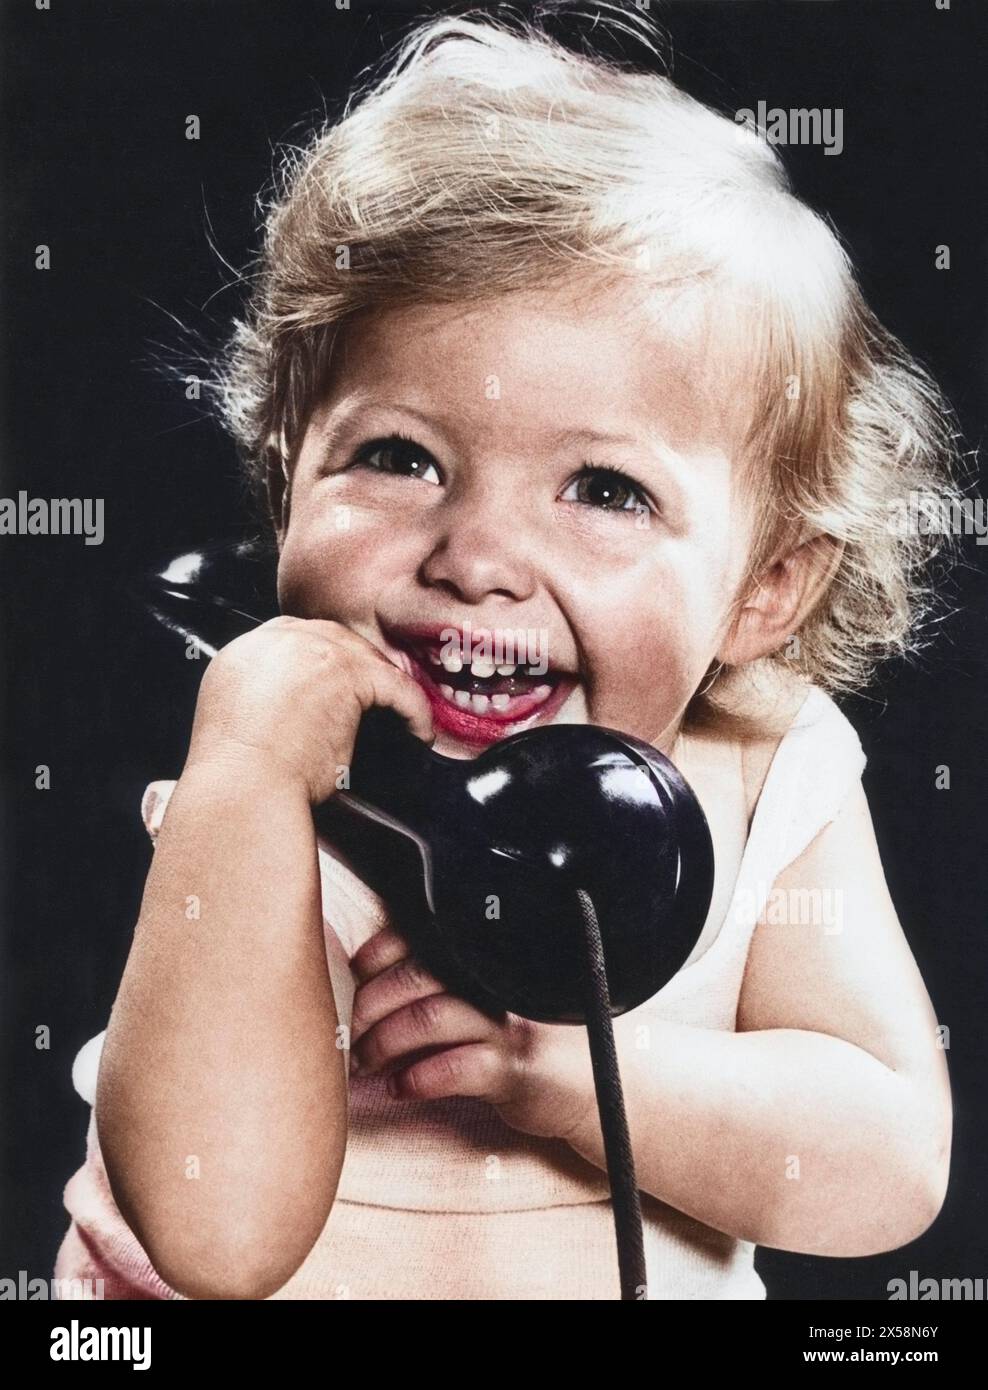 people, children, portrait - girls, little girl phoning, 1960s, ADDITIONAL-RIGHTS-CLEARANCE-INFO-NOT-AVAILABLE Stock Photo